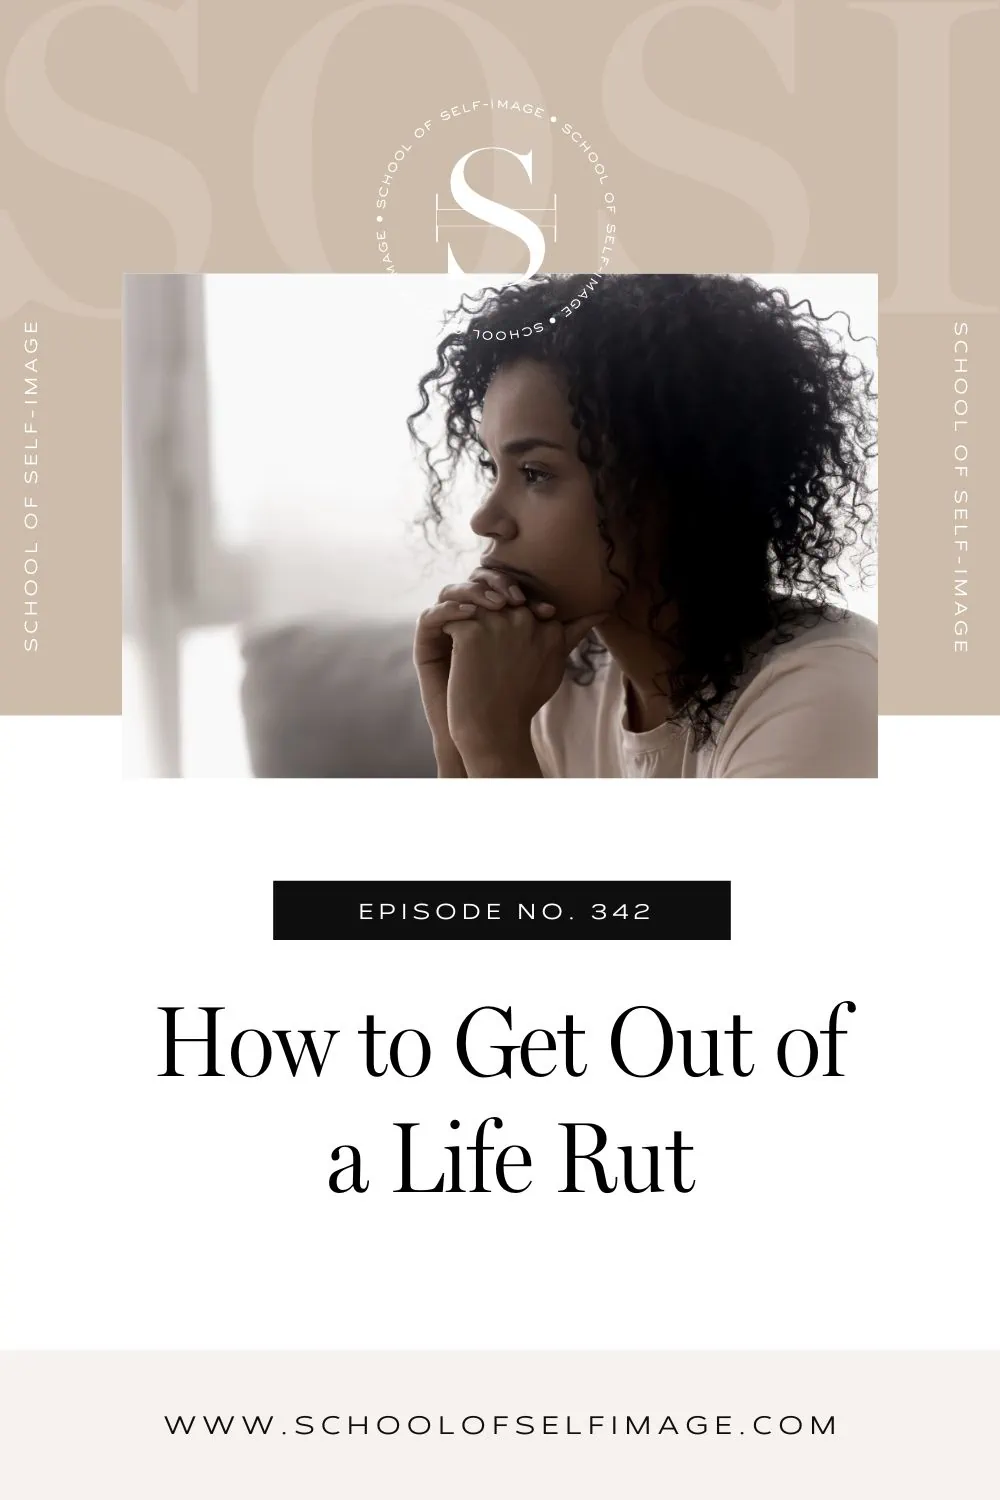 How to Get Out of a Life Rut